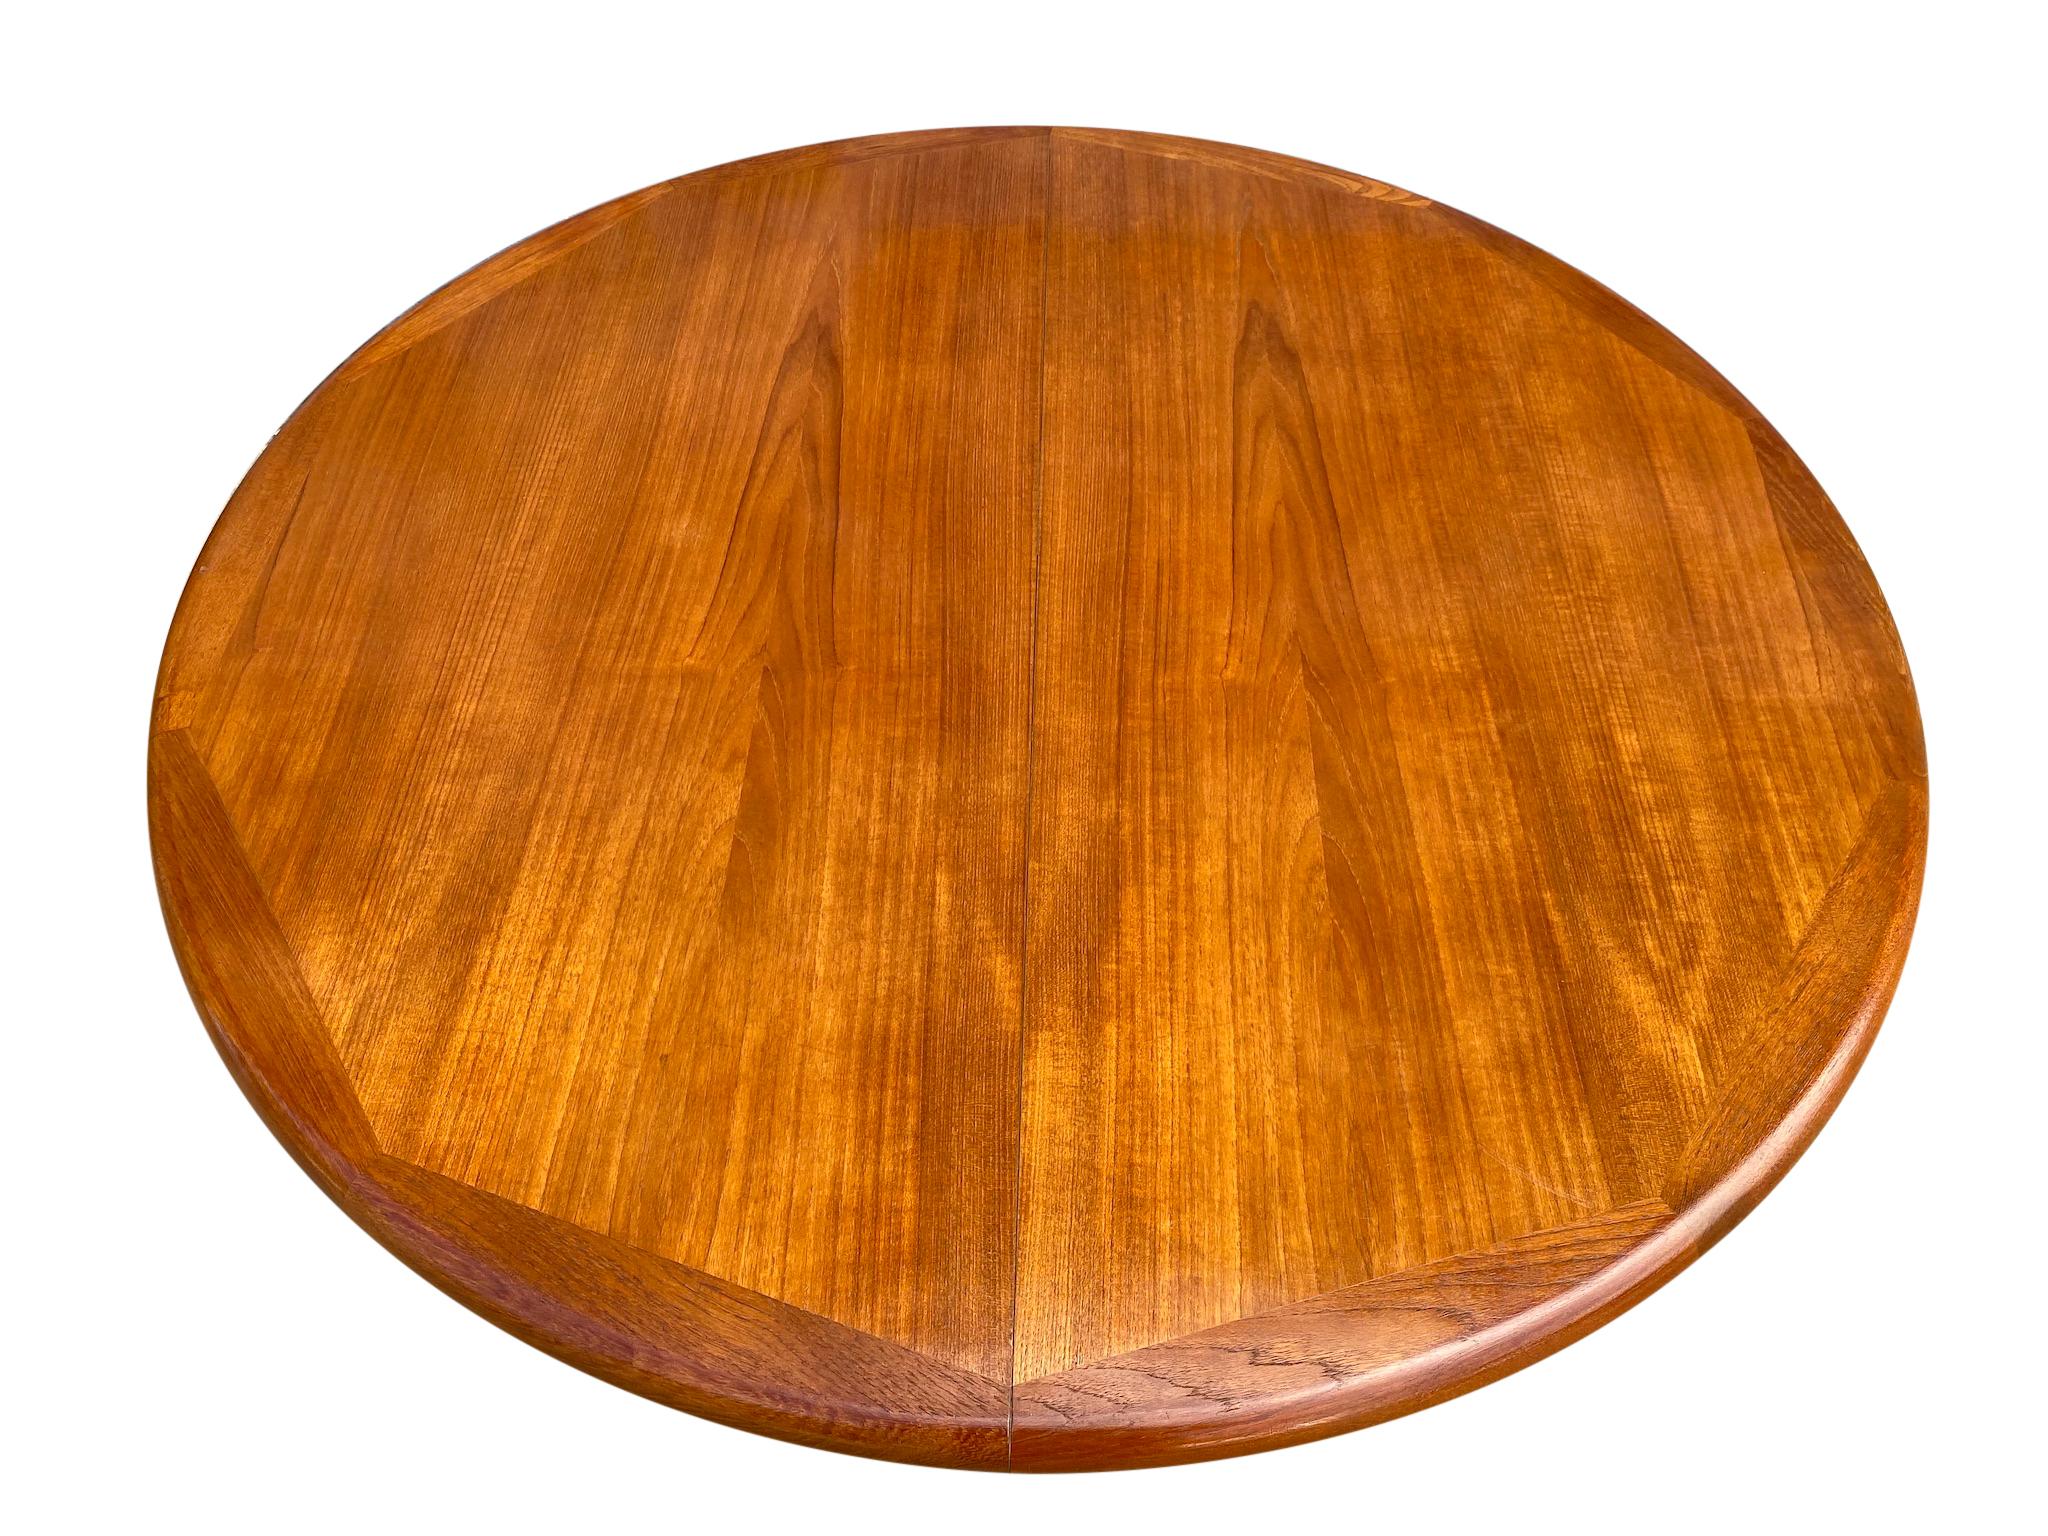 Midcentury solid teak Danish extension dining table with (2) leaves. This table is very high quality hand built by CJ Rosengaarden Hojre. Solid teak legs with center base. This table is in great vintage condition, all (2) leaves match the table